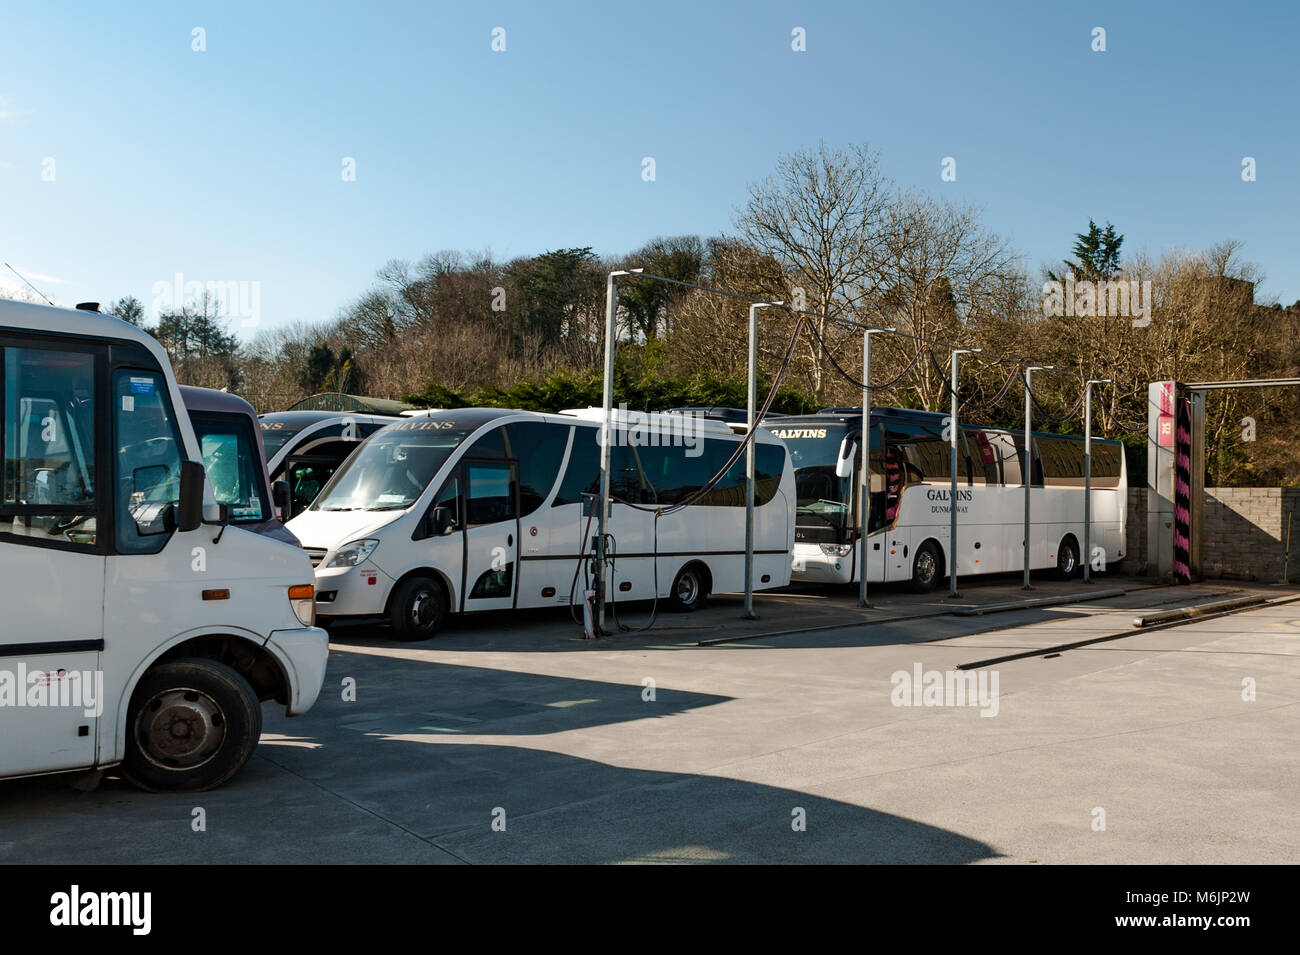 Coaches parked in the yard of Galvins Coach Company, Dunmanway, County Cork, Ireland with copy space. Stock Photo